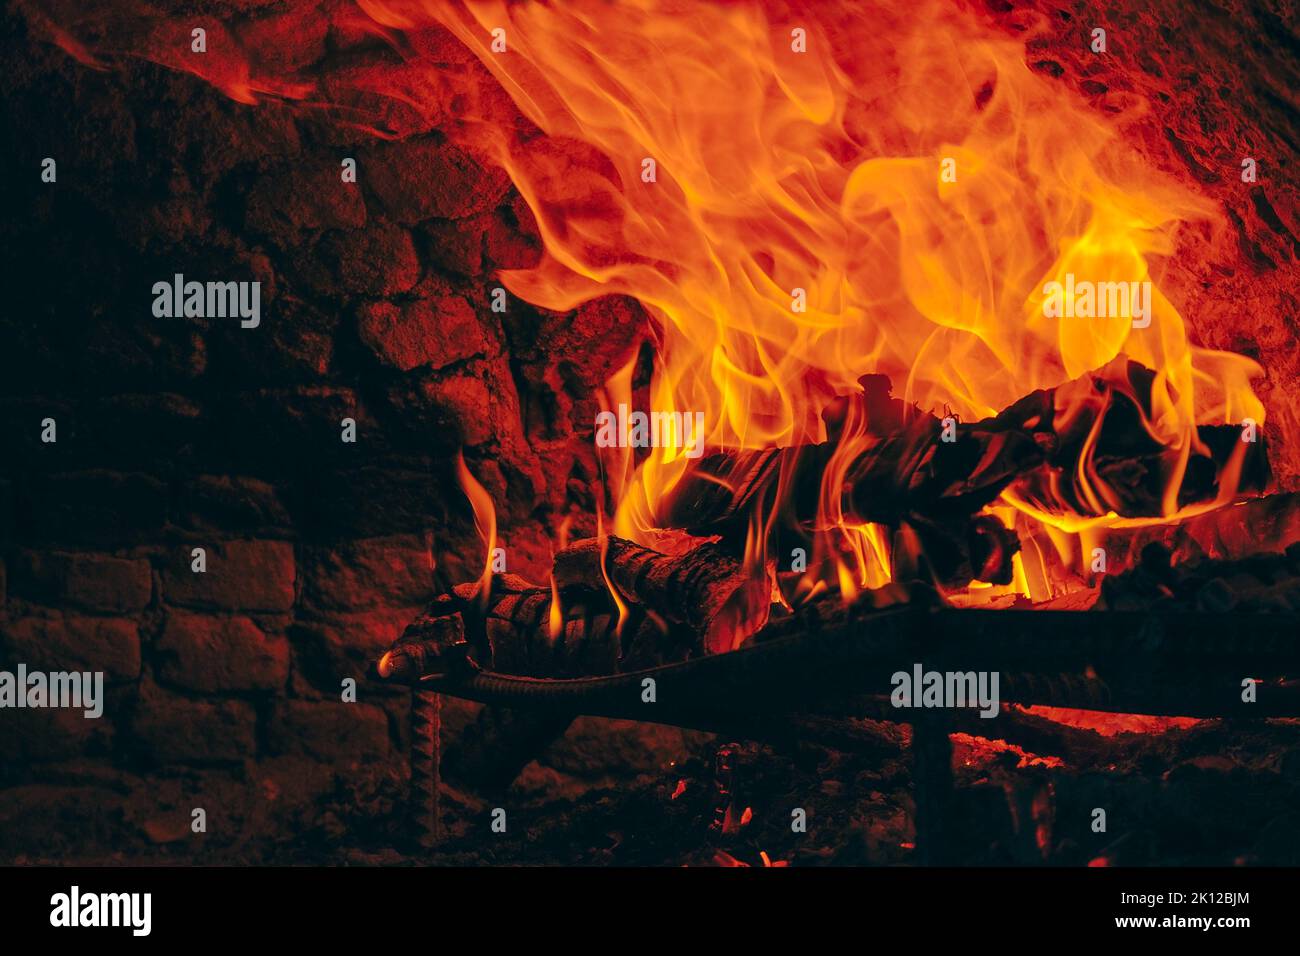 Wood fire in yellow and red colors burning in stone oven, copy space. Stock Photo